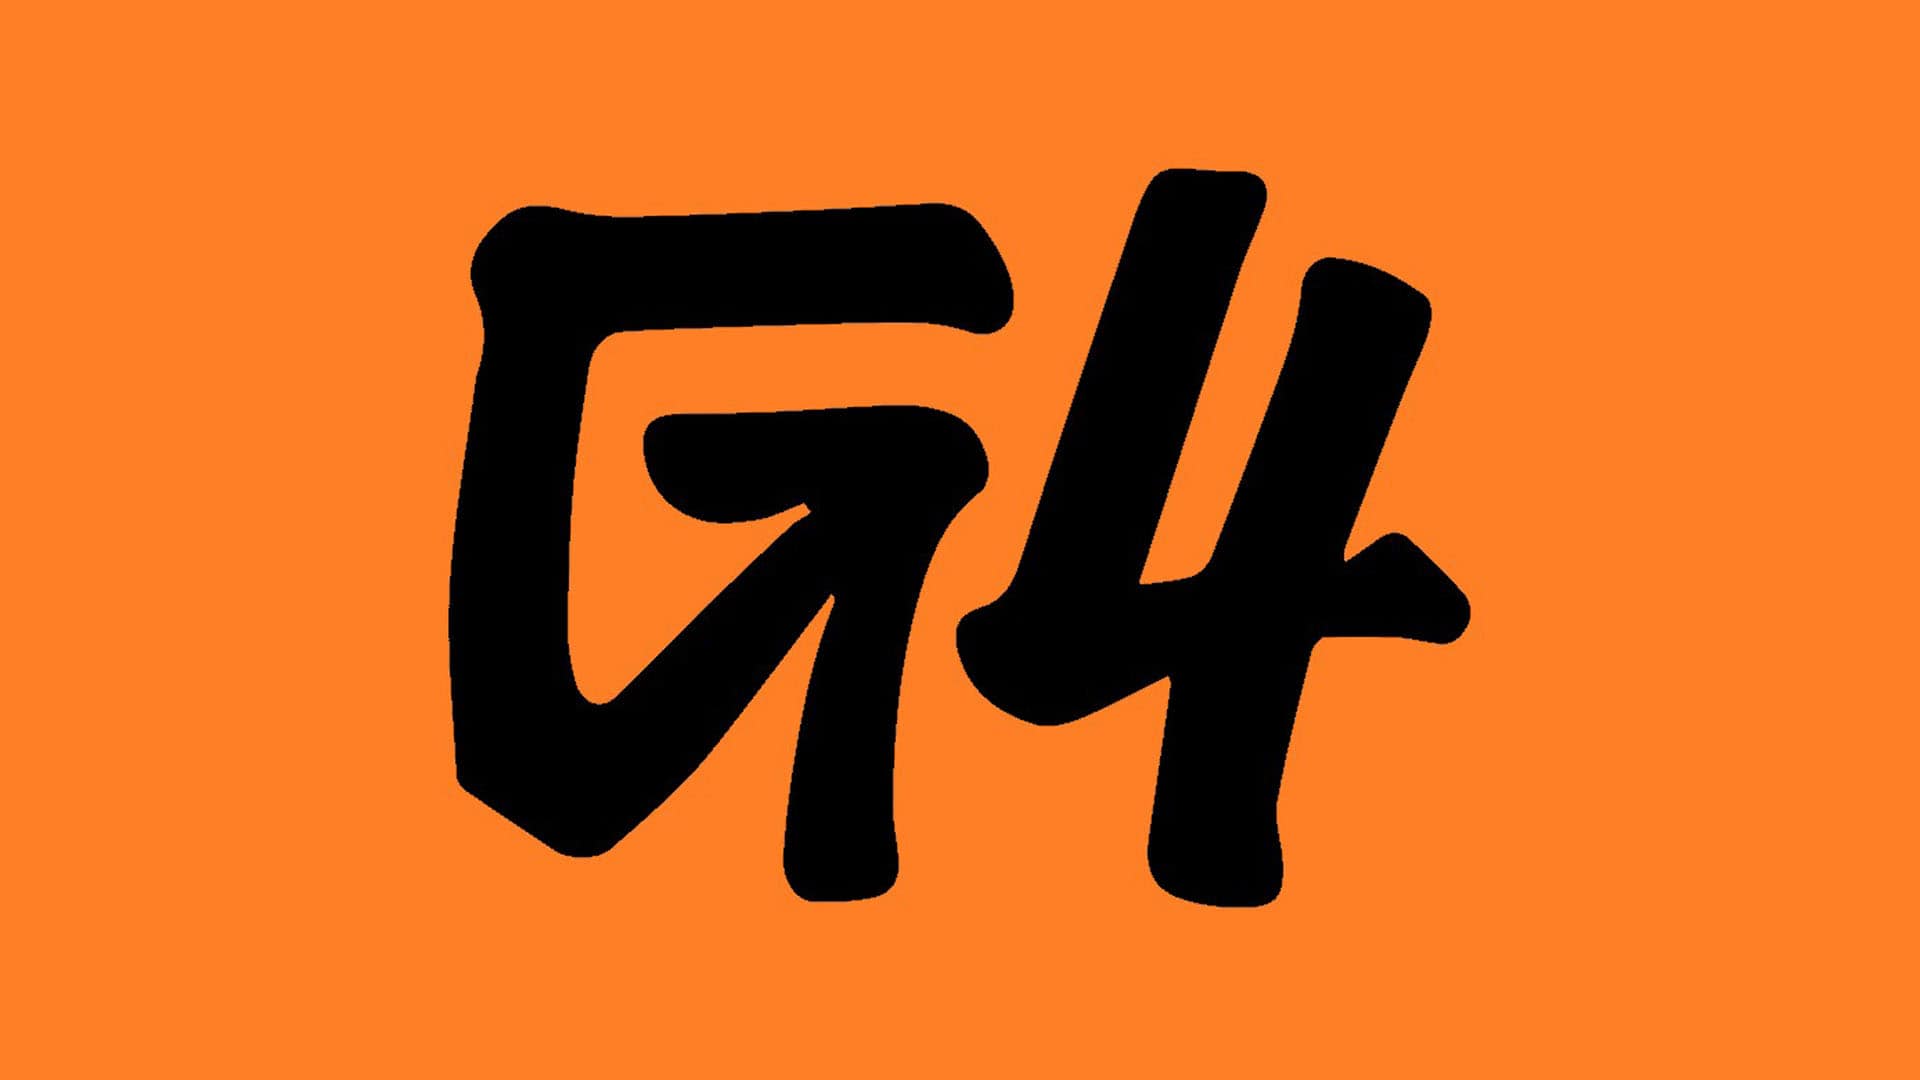 G4 TV logo, representing the iconic gaming network